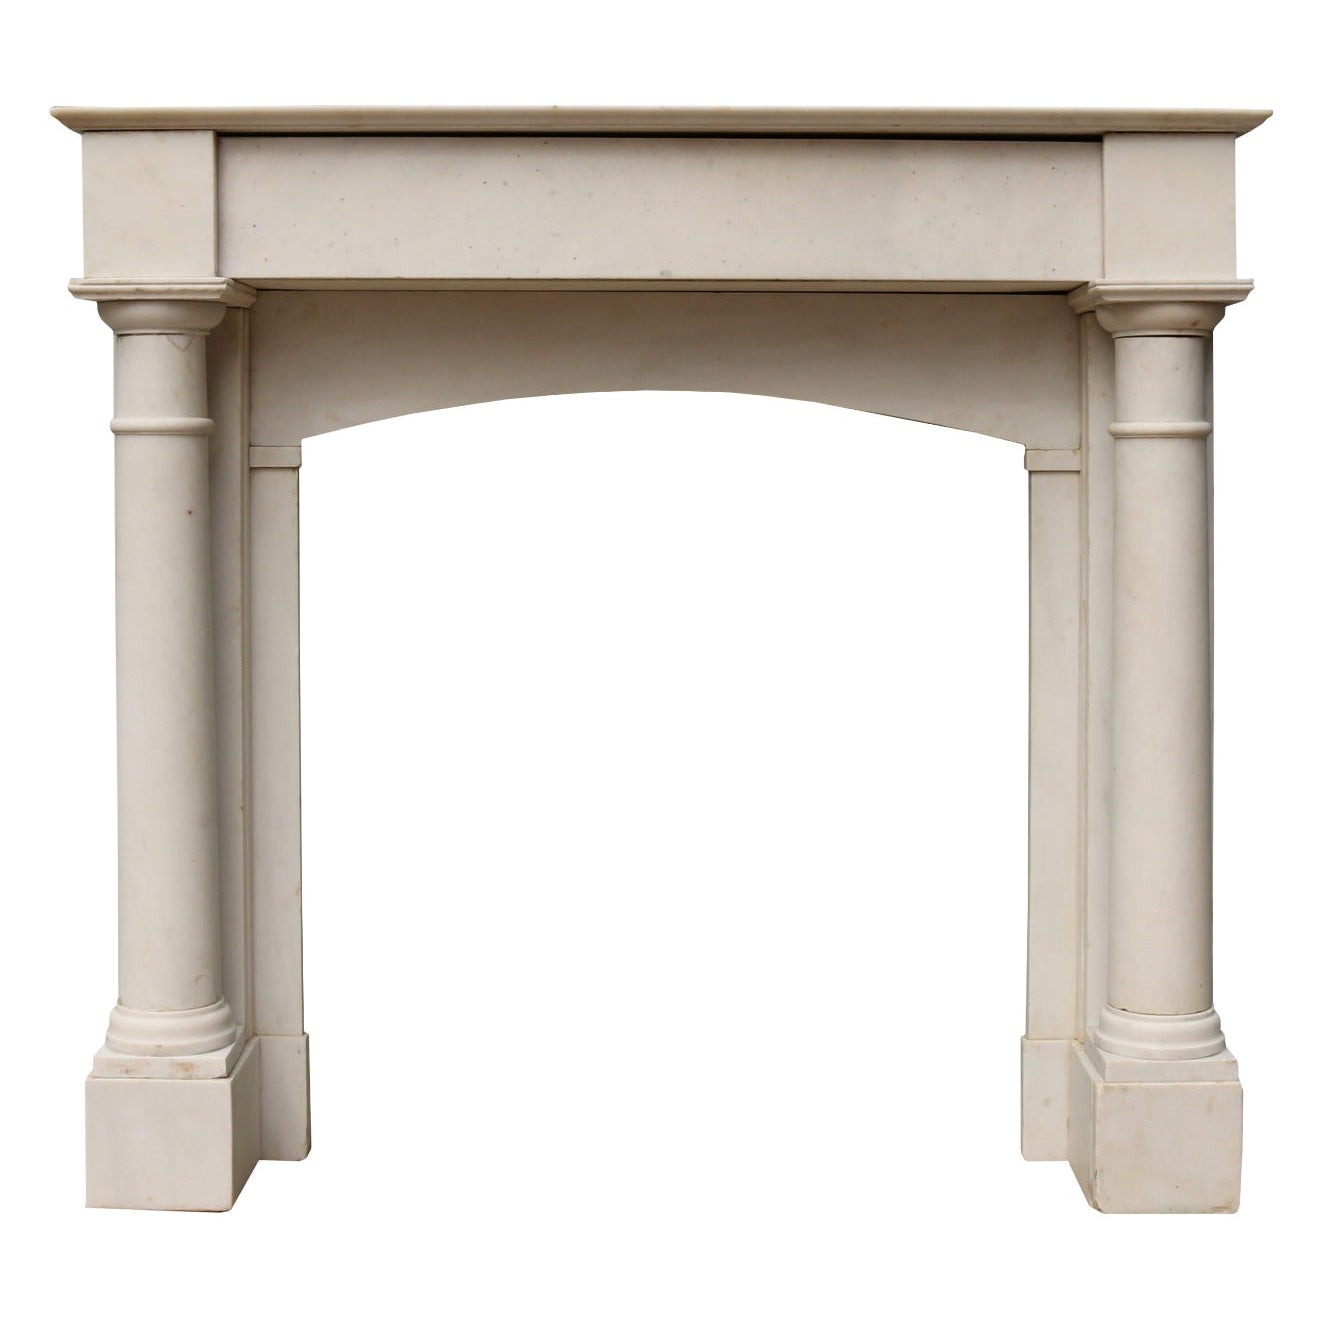 Antique White Statuary Marble Fire Mantel For Sale